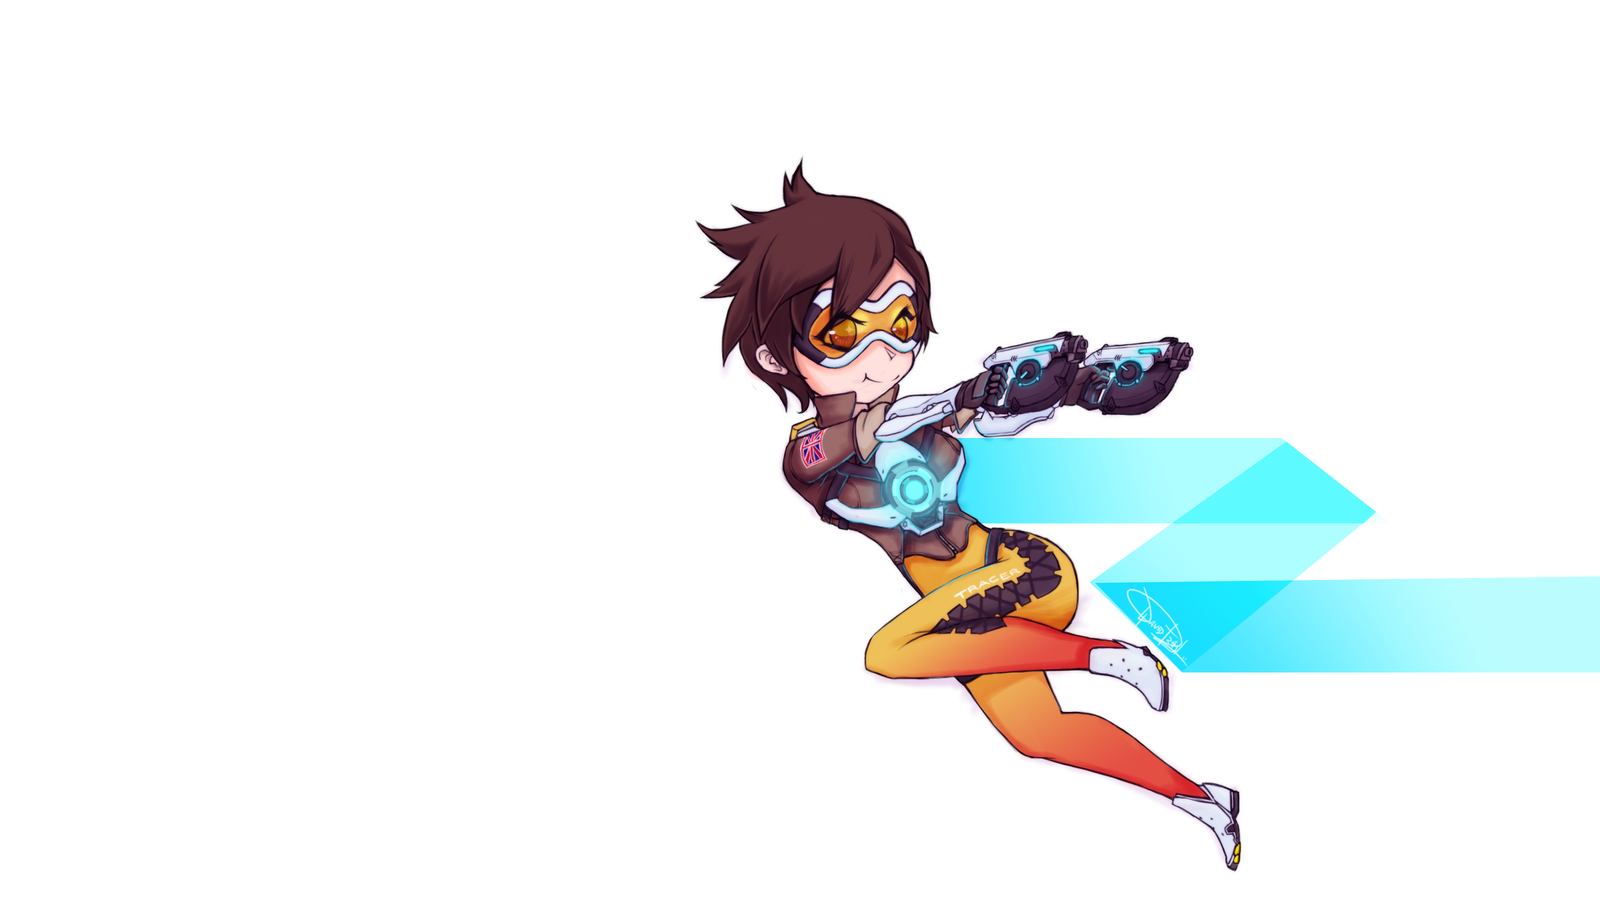 Overwatch   Tracer by Dai kunn